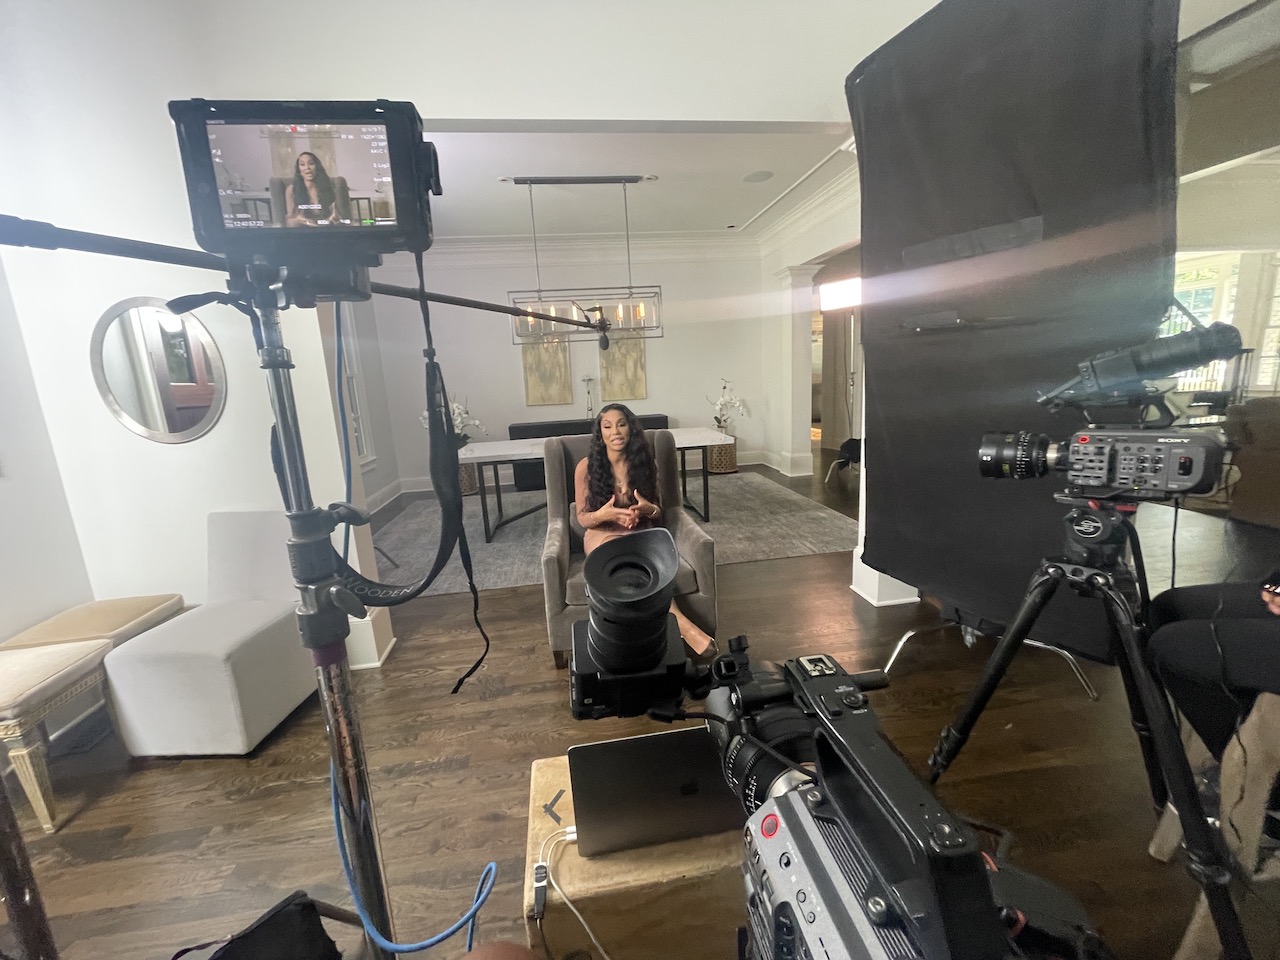 BlackPopBTS Tamar Braxton by CI Studios with her with long brown hair sitting on a gray chair talking with equipment around